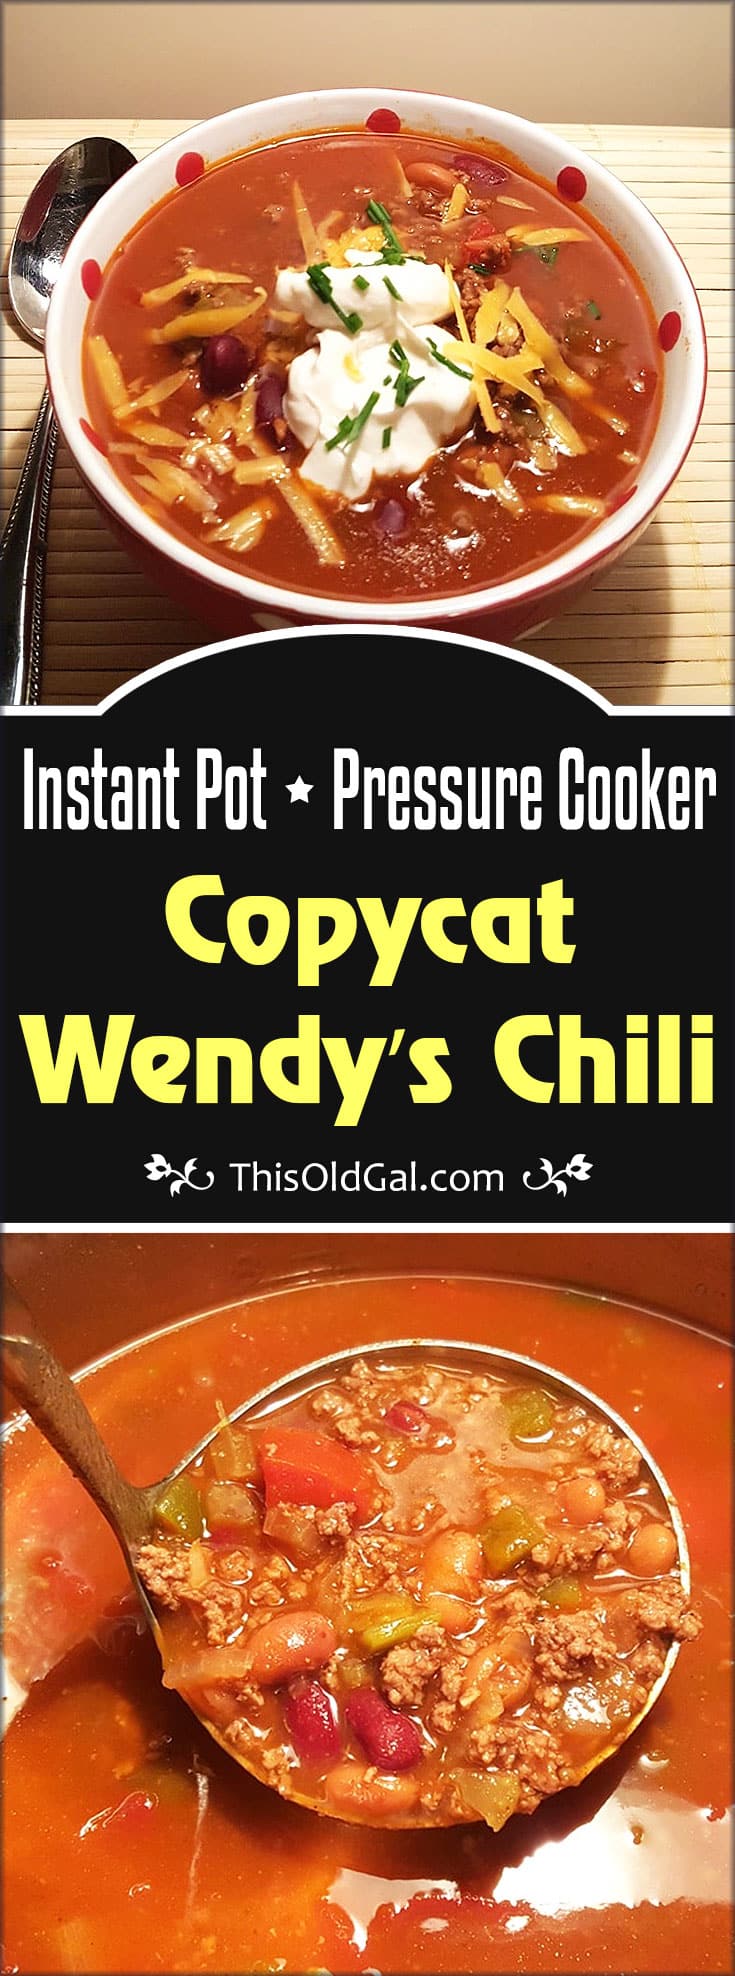 Pressure Cooker Copycat Wendy S Chili Recipe This Old Gal